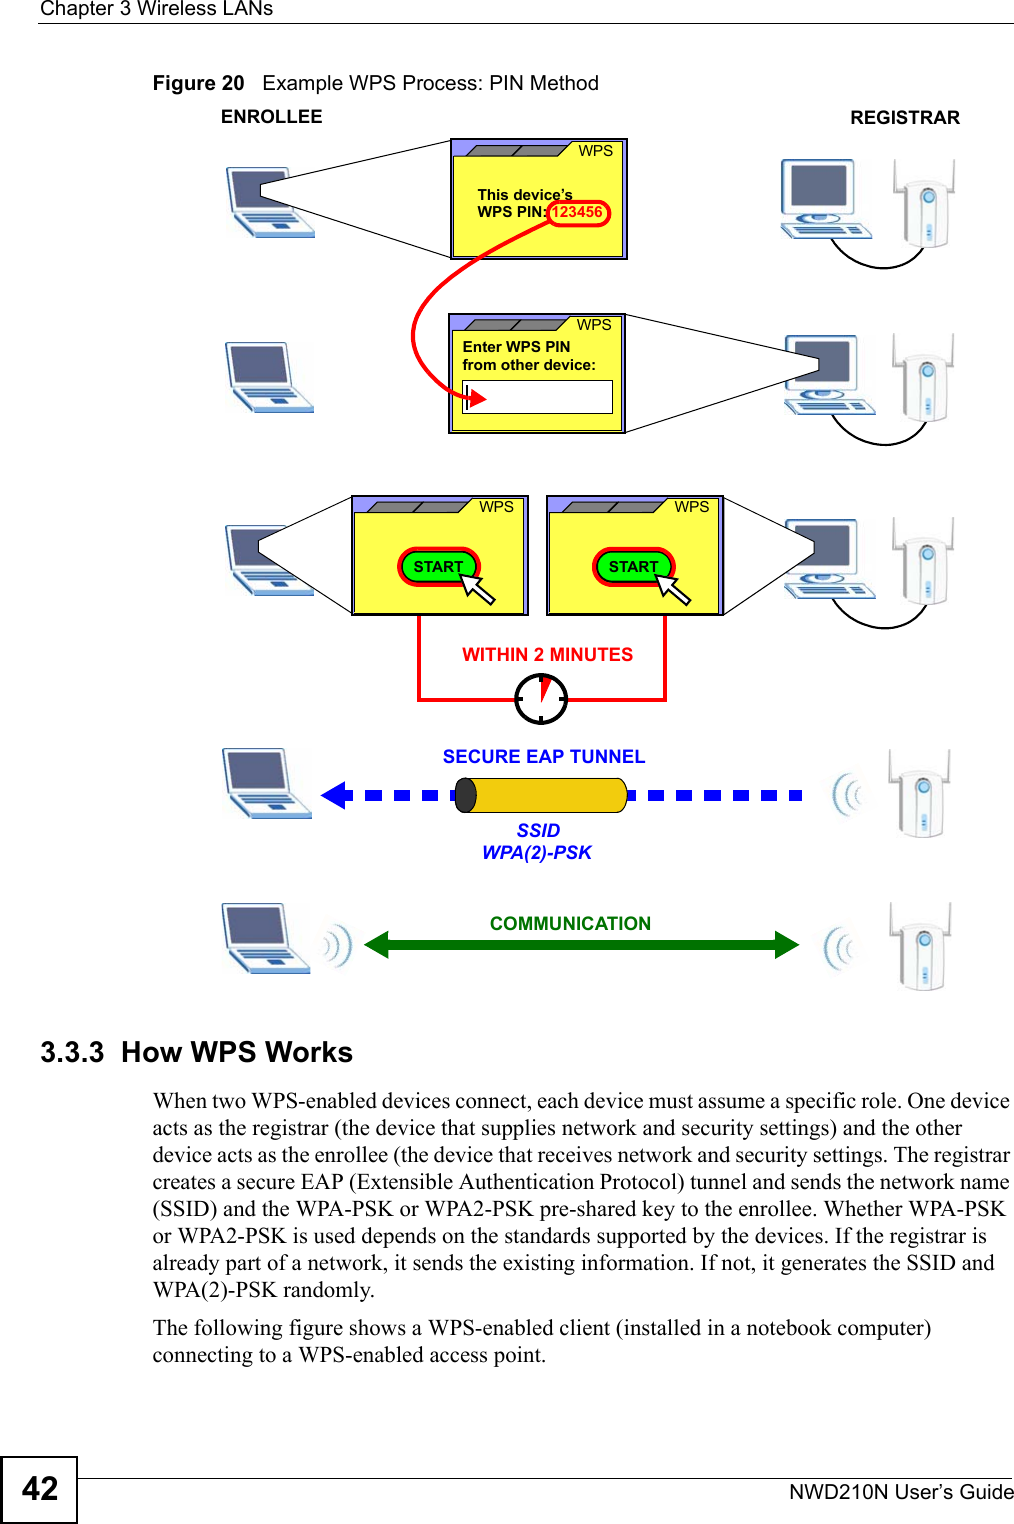 Chapter 3 Wireless LANsNWD210N User’s Guide42Figure 20   Example WPS Process: PIN Method3.3.3  How WPS WorksWhen two WPS-enabled devices connect, each device must assume a specific role. One device acts as the registrar (the device that supplies network and security settings) and the other device acts as the enrollee (the device that receives network and security settings. The registrar creates a secure EAP (Extensible Authentication Protocol) tunnel and sends the network name (SSID) and the WPA-PSK or WPA2-PSK pre-shared key to the enrollee. Whether WPA-PSK or WPA2-PSK is used depends on the standards supported by the devices. If the registrar is already part of a network, it sends the existing information. If not, it generates the SSID and WPA(2)-PSK randomly.The following figure shows a WPS-enabled client (installed in a notebook computer) connecting to a WPS-enabled access point.ENROLLEESECURE EAP TUNNELSSIDWPA(2)-PSKWITHIN 2 MINUTESCOMMUNICATIONThis device’s WPSEnter WPS PIN  WPSfrom other device: WPS PIN: 123456WPSSTARTWPSSTARTREGISTRAR